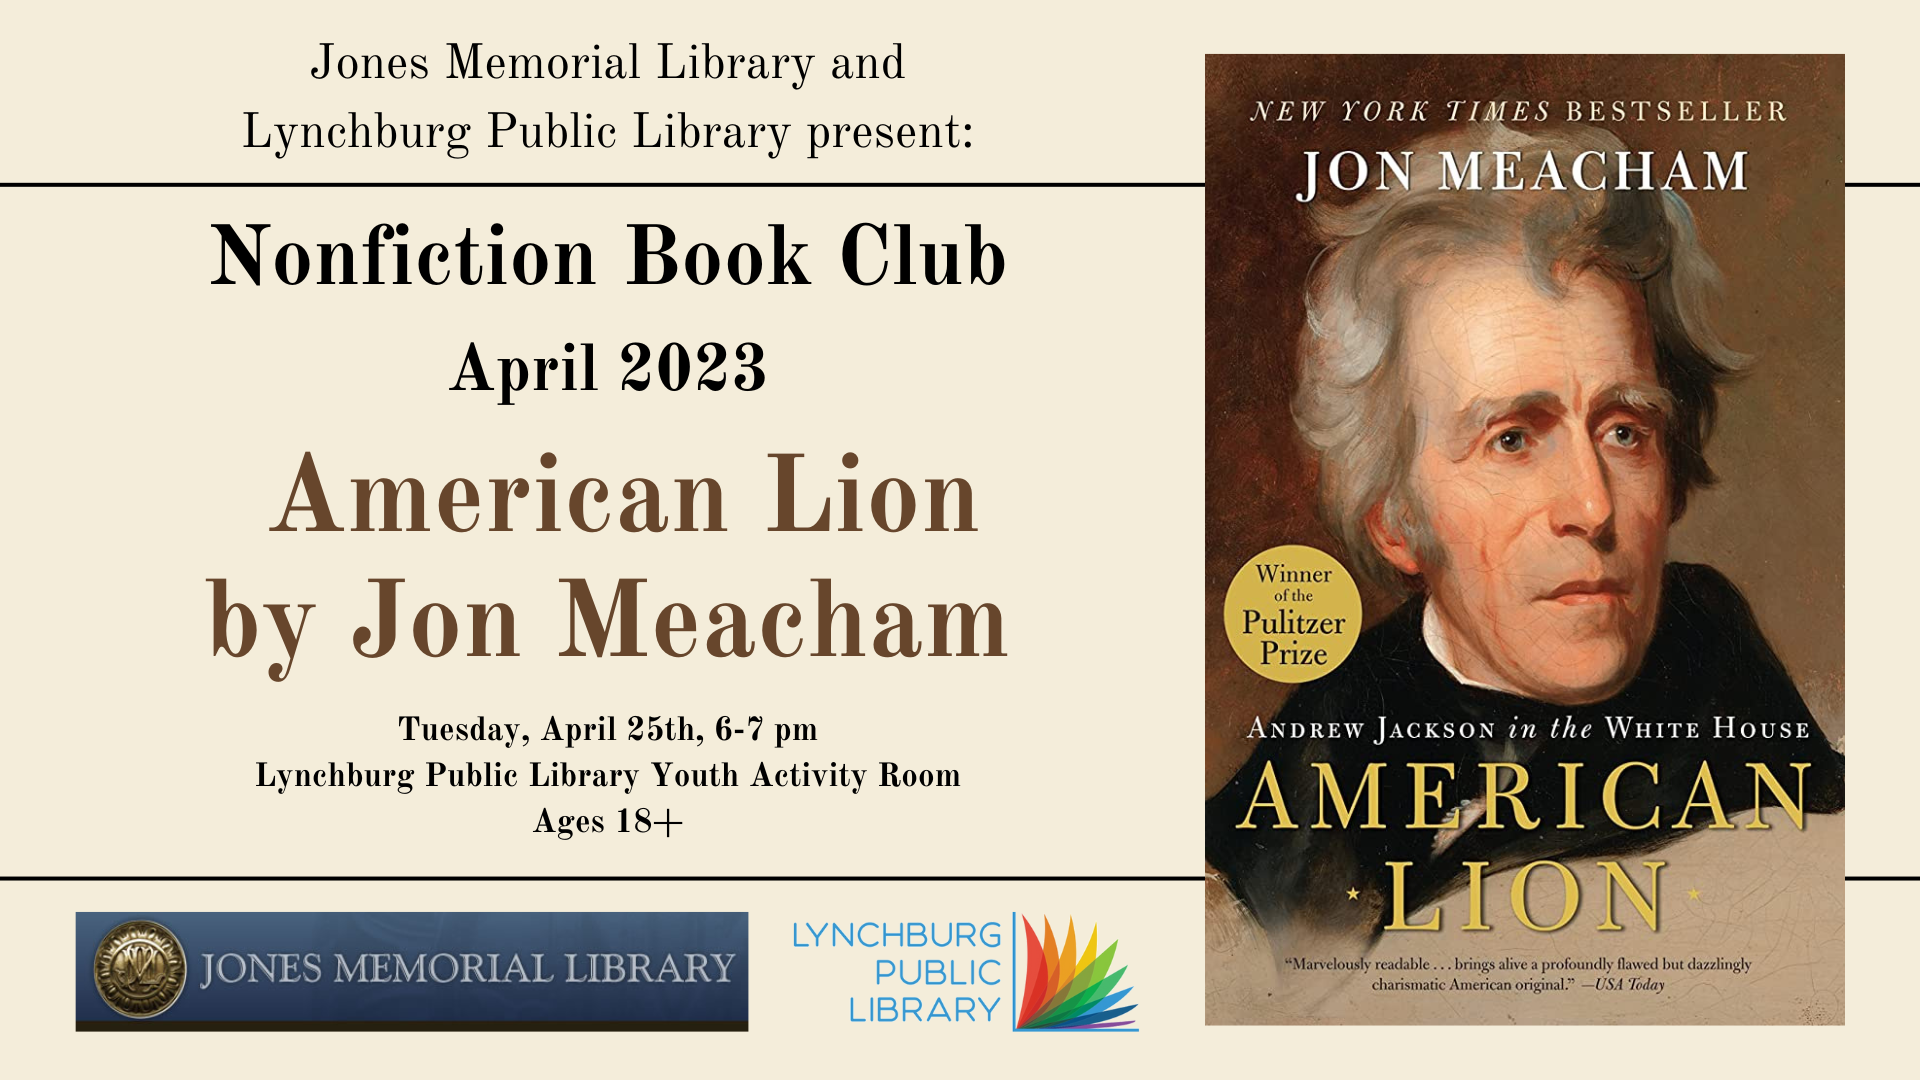 jones memorial library and lynchburg public library present: nonfiction book club; april 2023; american lion by jon meacham; tuesday, april 25th, 6-7 pm; lynchburg public library youth activity room; ages 18+